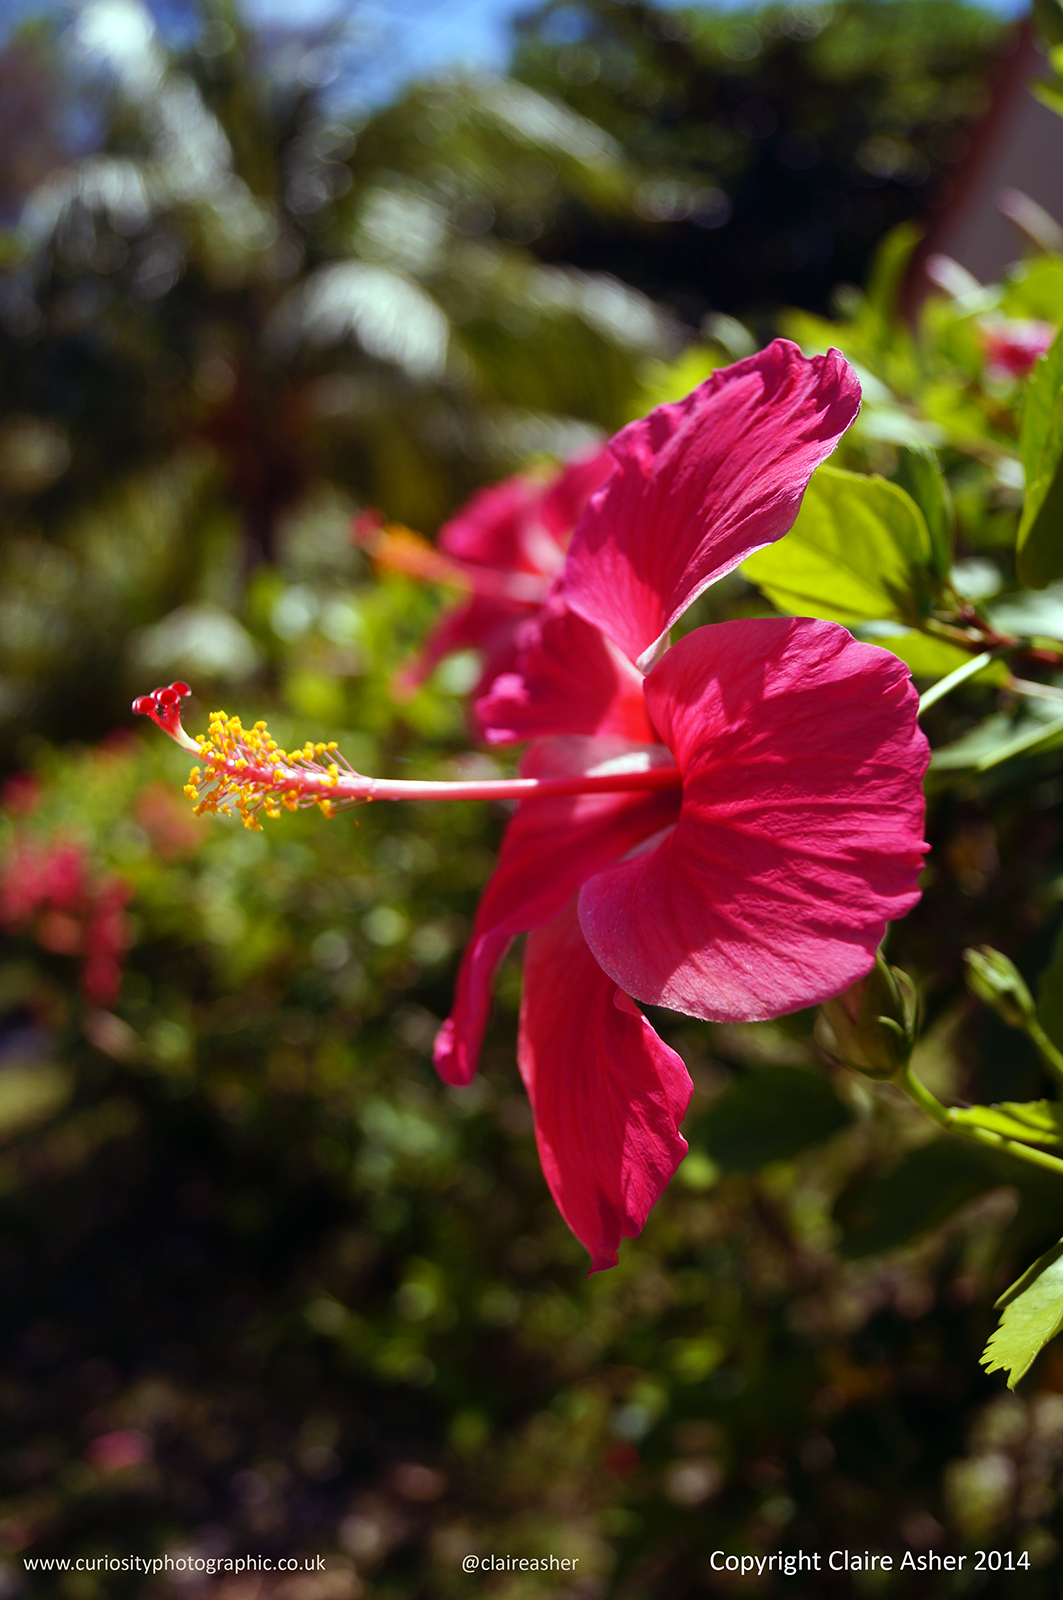 A pink flower (Hibiscus rosa-sinensis) photographed in Flores, Indonesia in 2014.